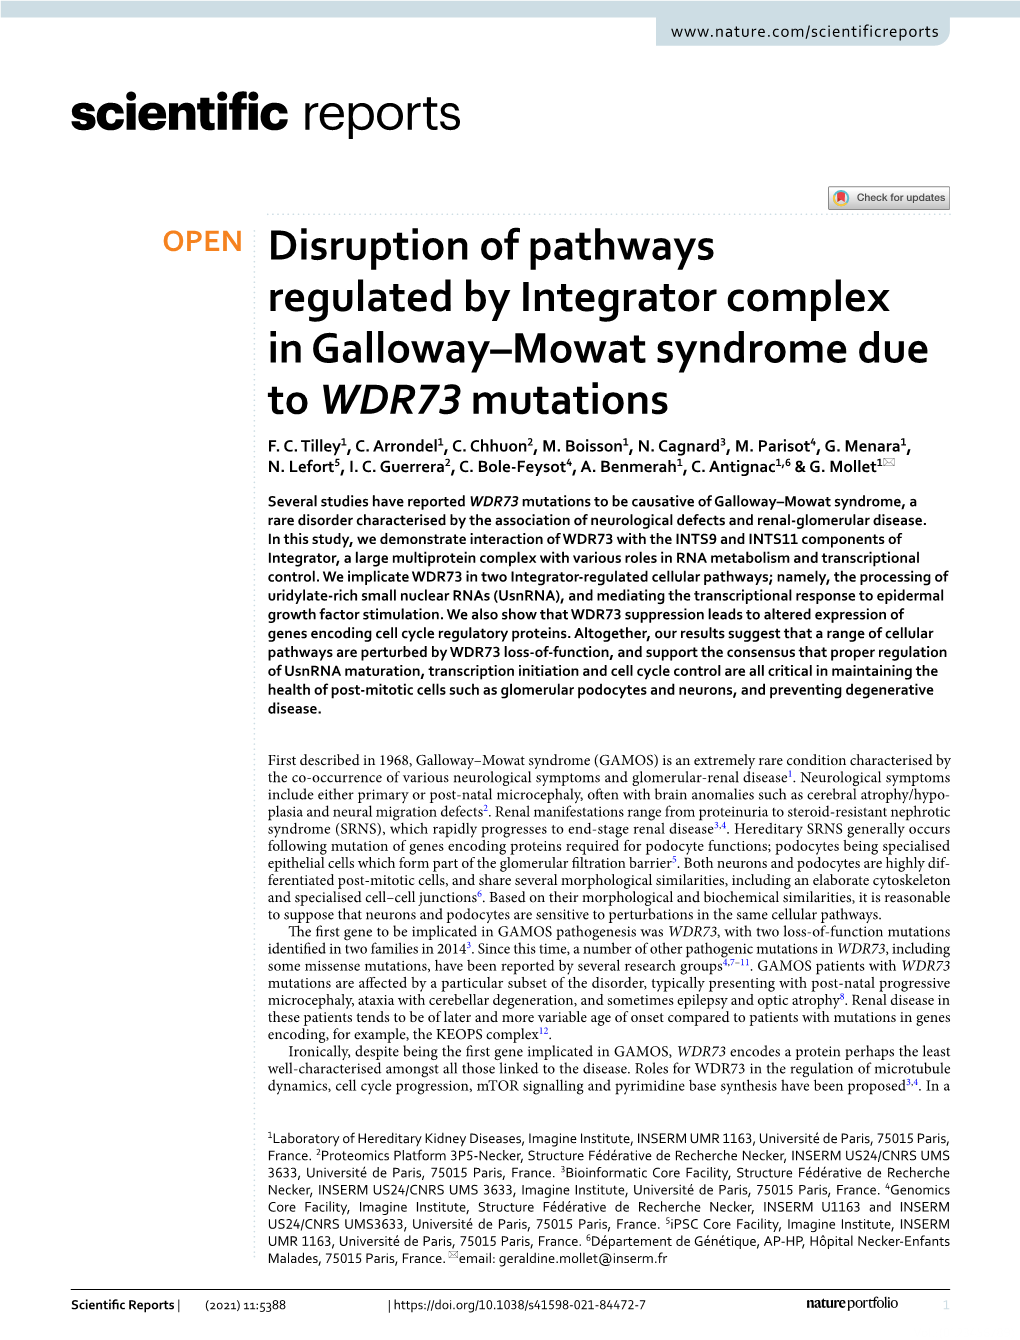 Disruption of Pathways Regulated by Integrator Complex in Galloway–Mowat Syndrome Due to WDR73 Mutations F